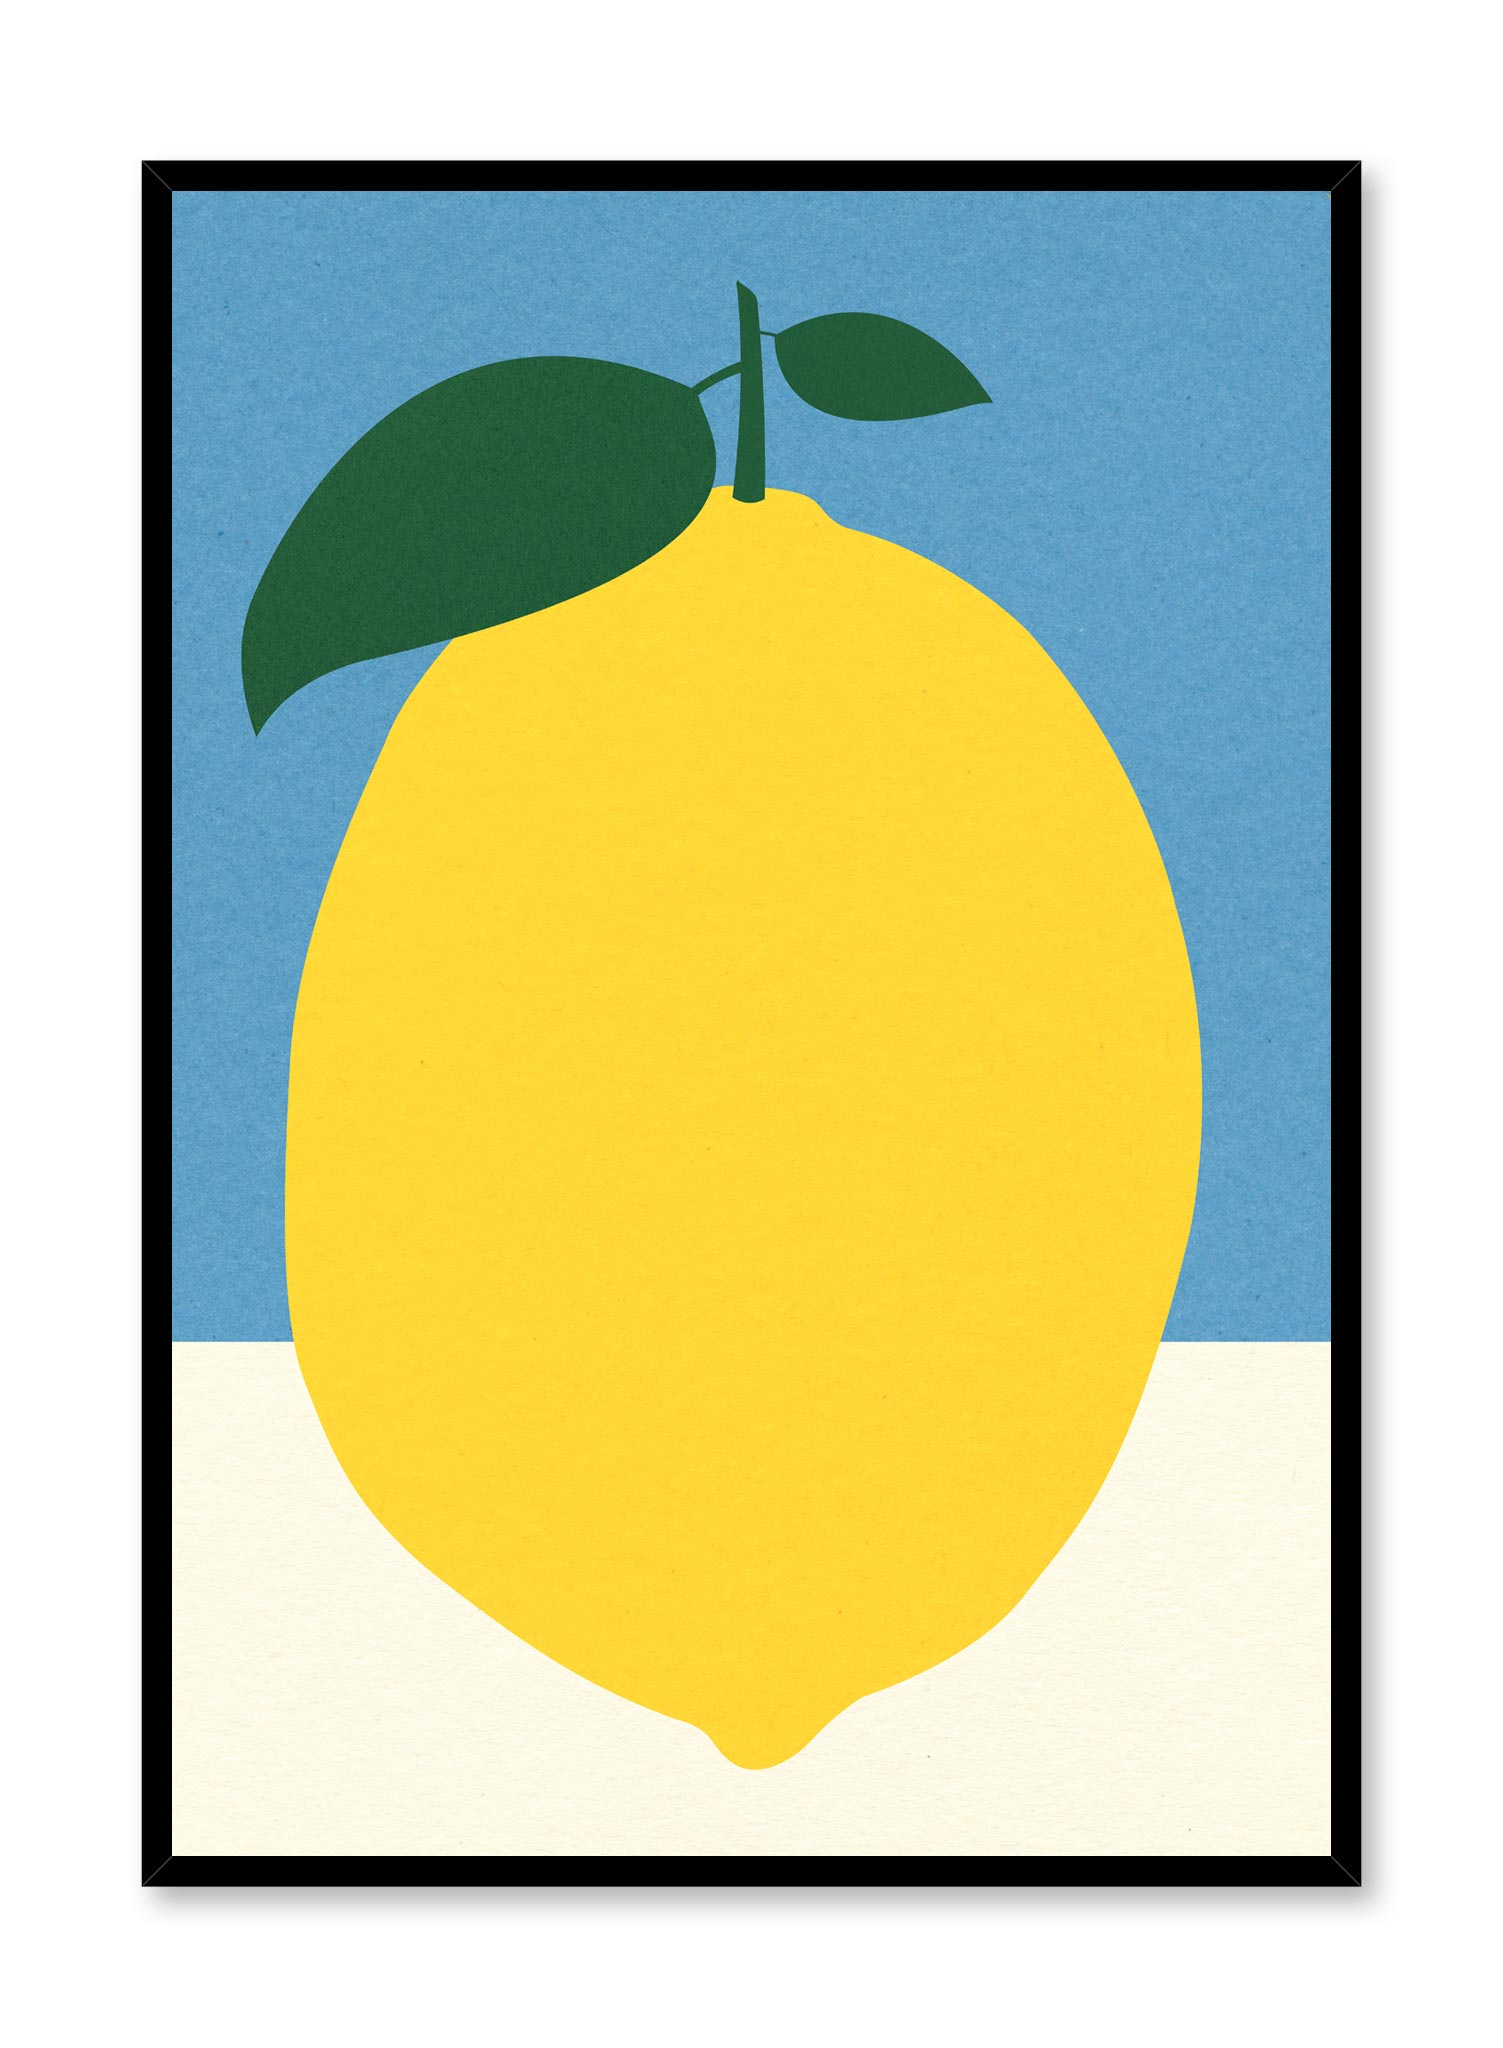 Modern minimalist poster by Opposite Wall with abstract collage illustration of lemon citron